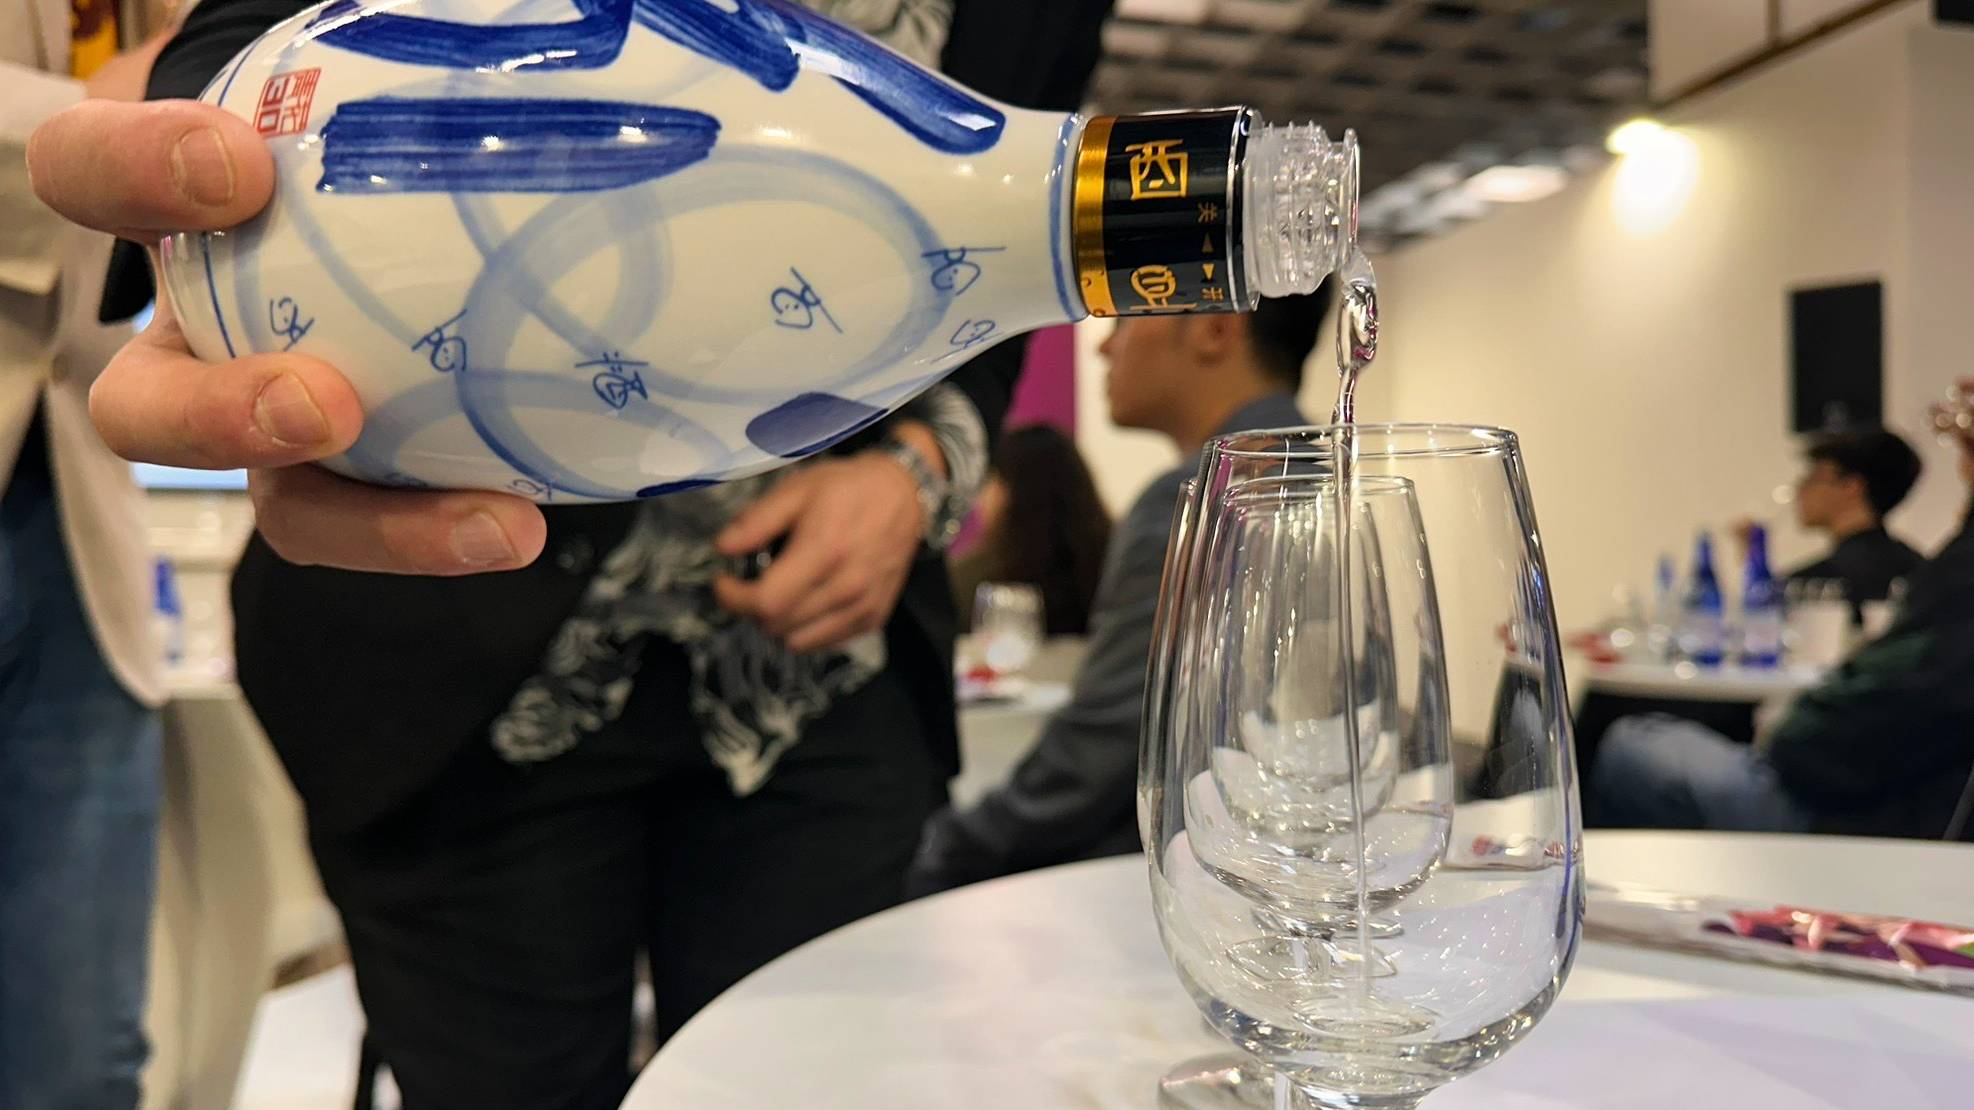 The trick to Baijiu tasting is to smell it and not to drink too much because the alcohol is so strong. /CGTN Europe